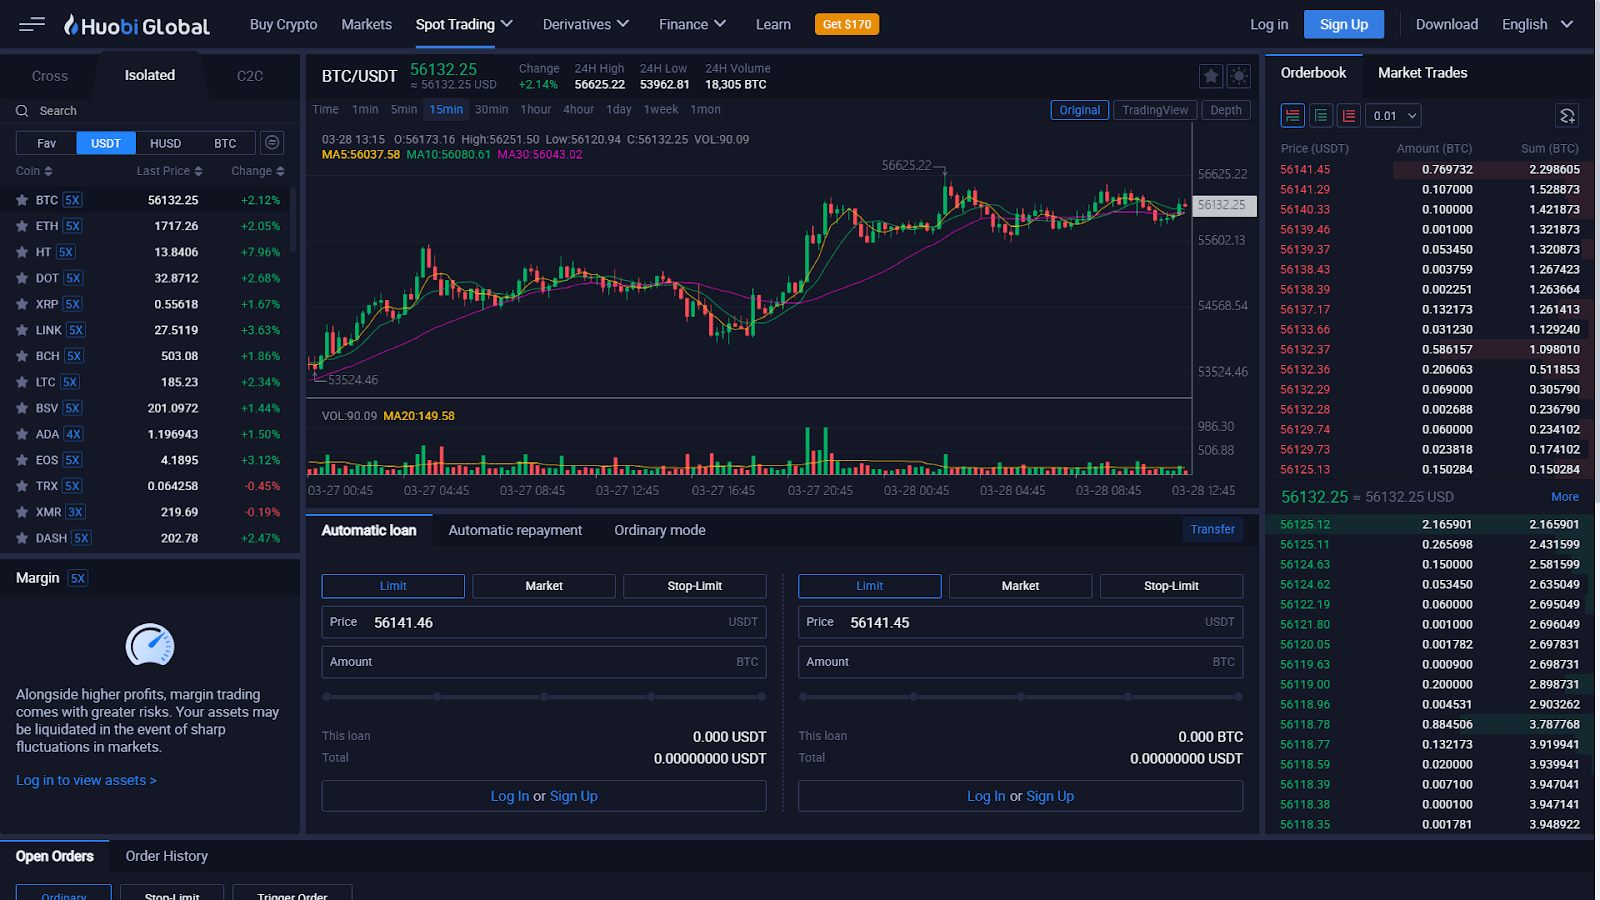 Huobi Leverage Trading | A Complete Guide - CoinCodeCap